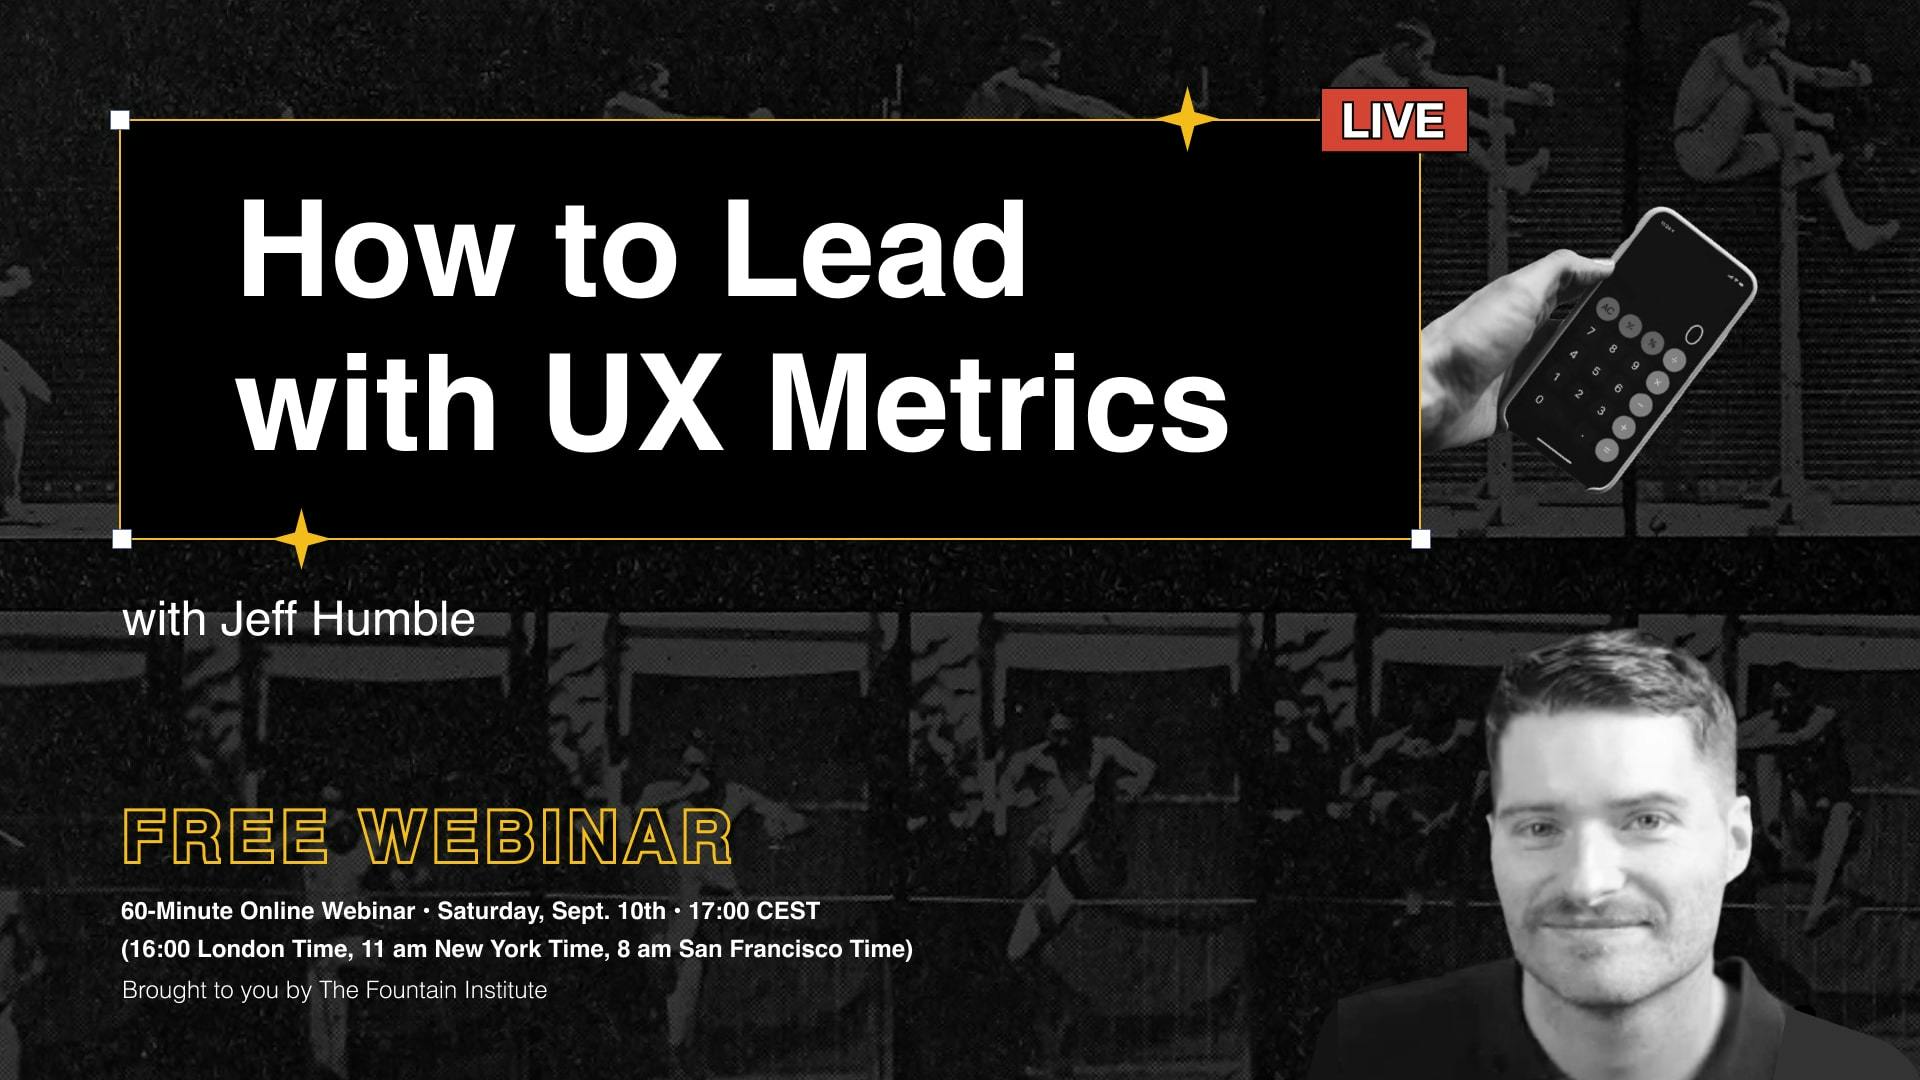 How to Lead with UX Metrics, a free webinar by Jeff Humble